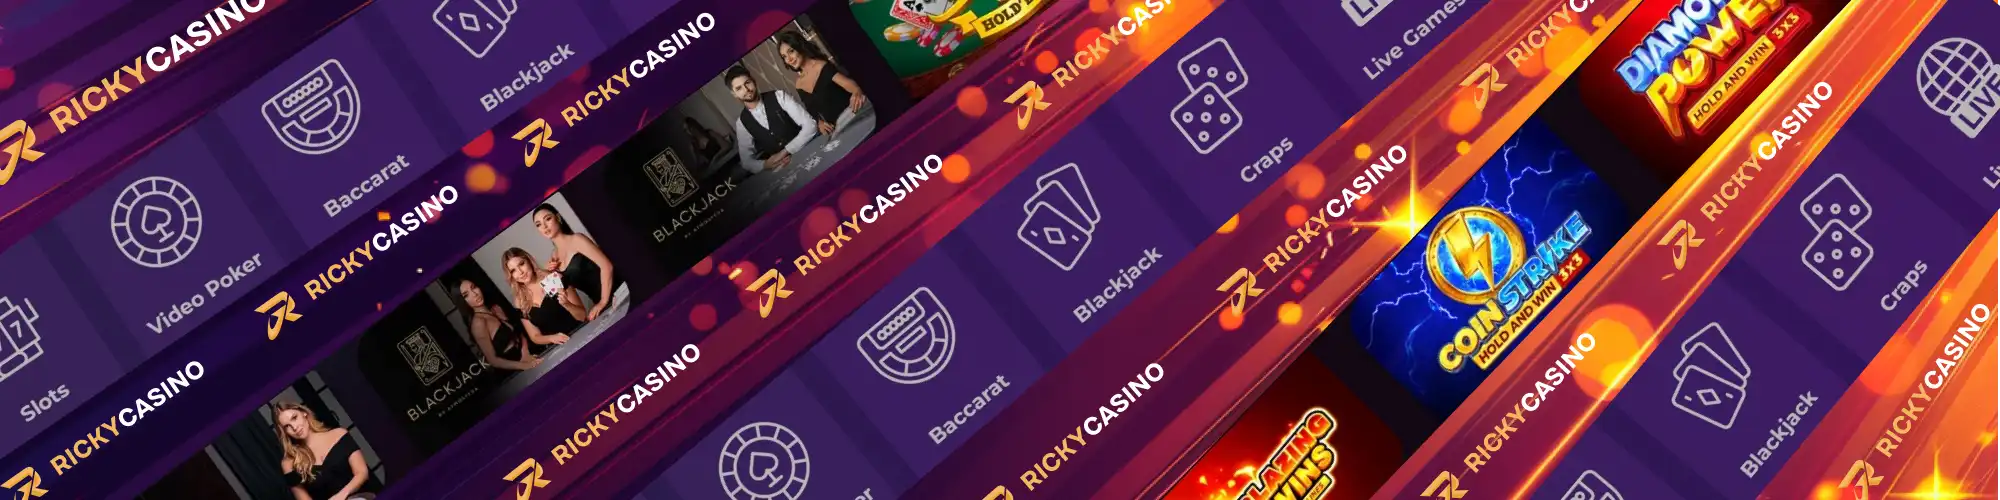 Best Online Casino Games at Ricky Casino